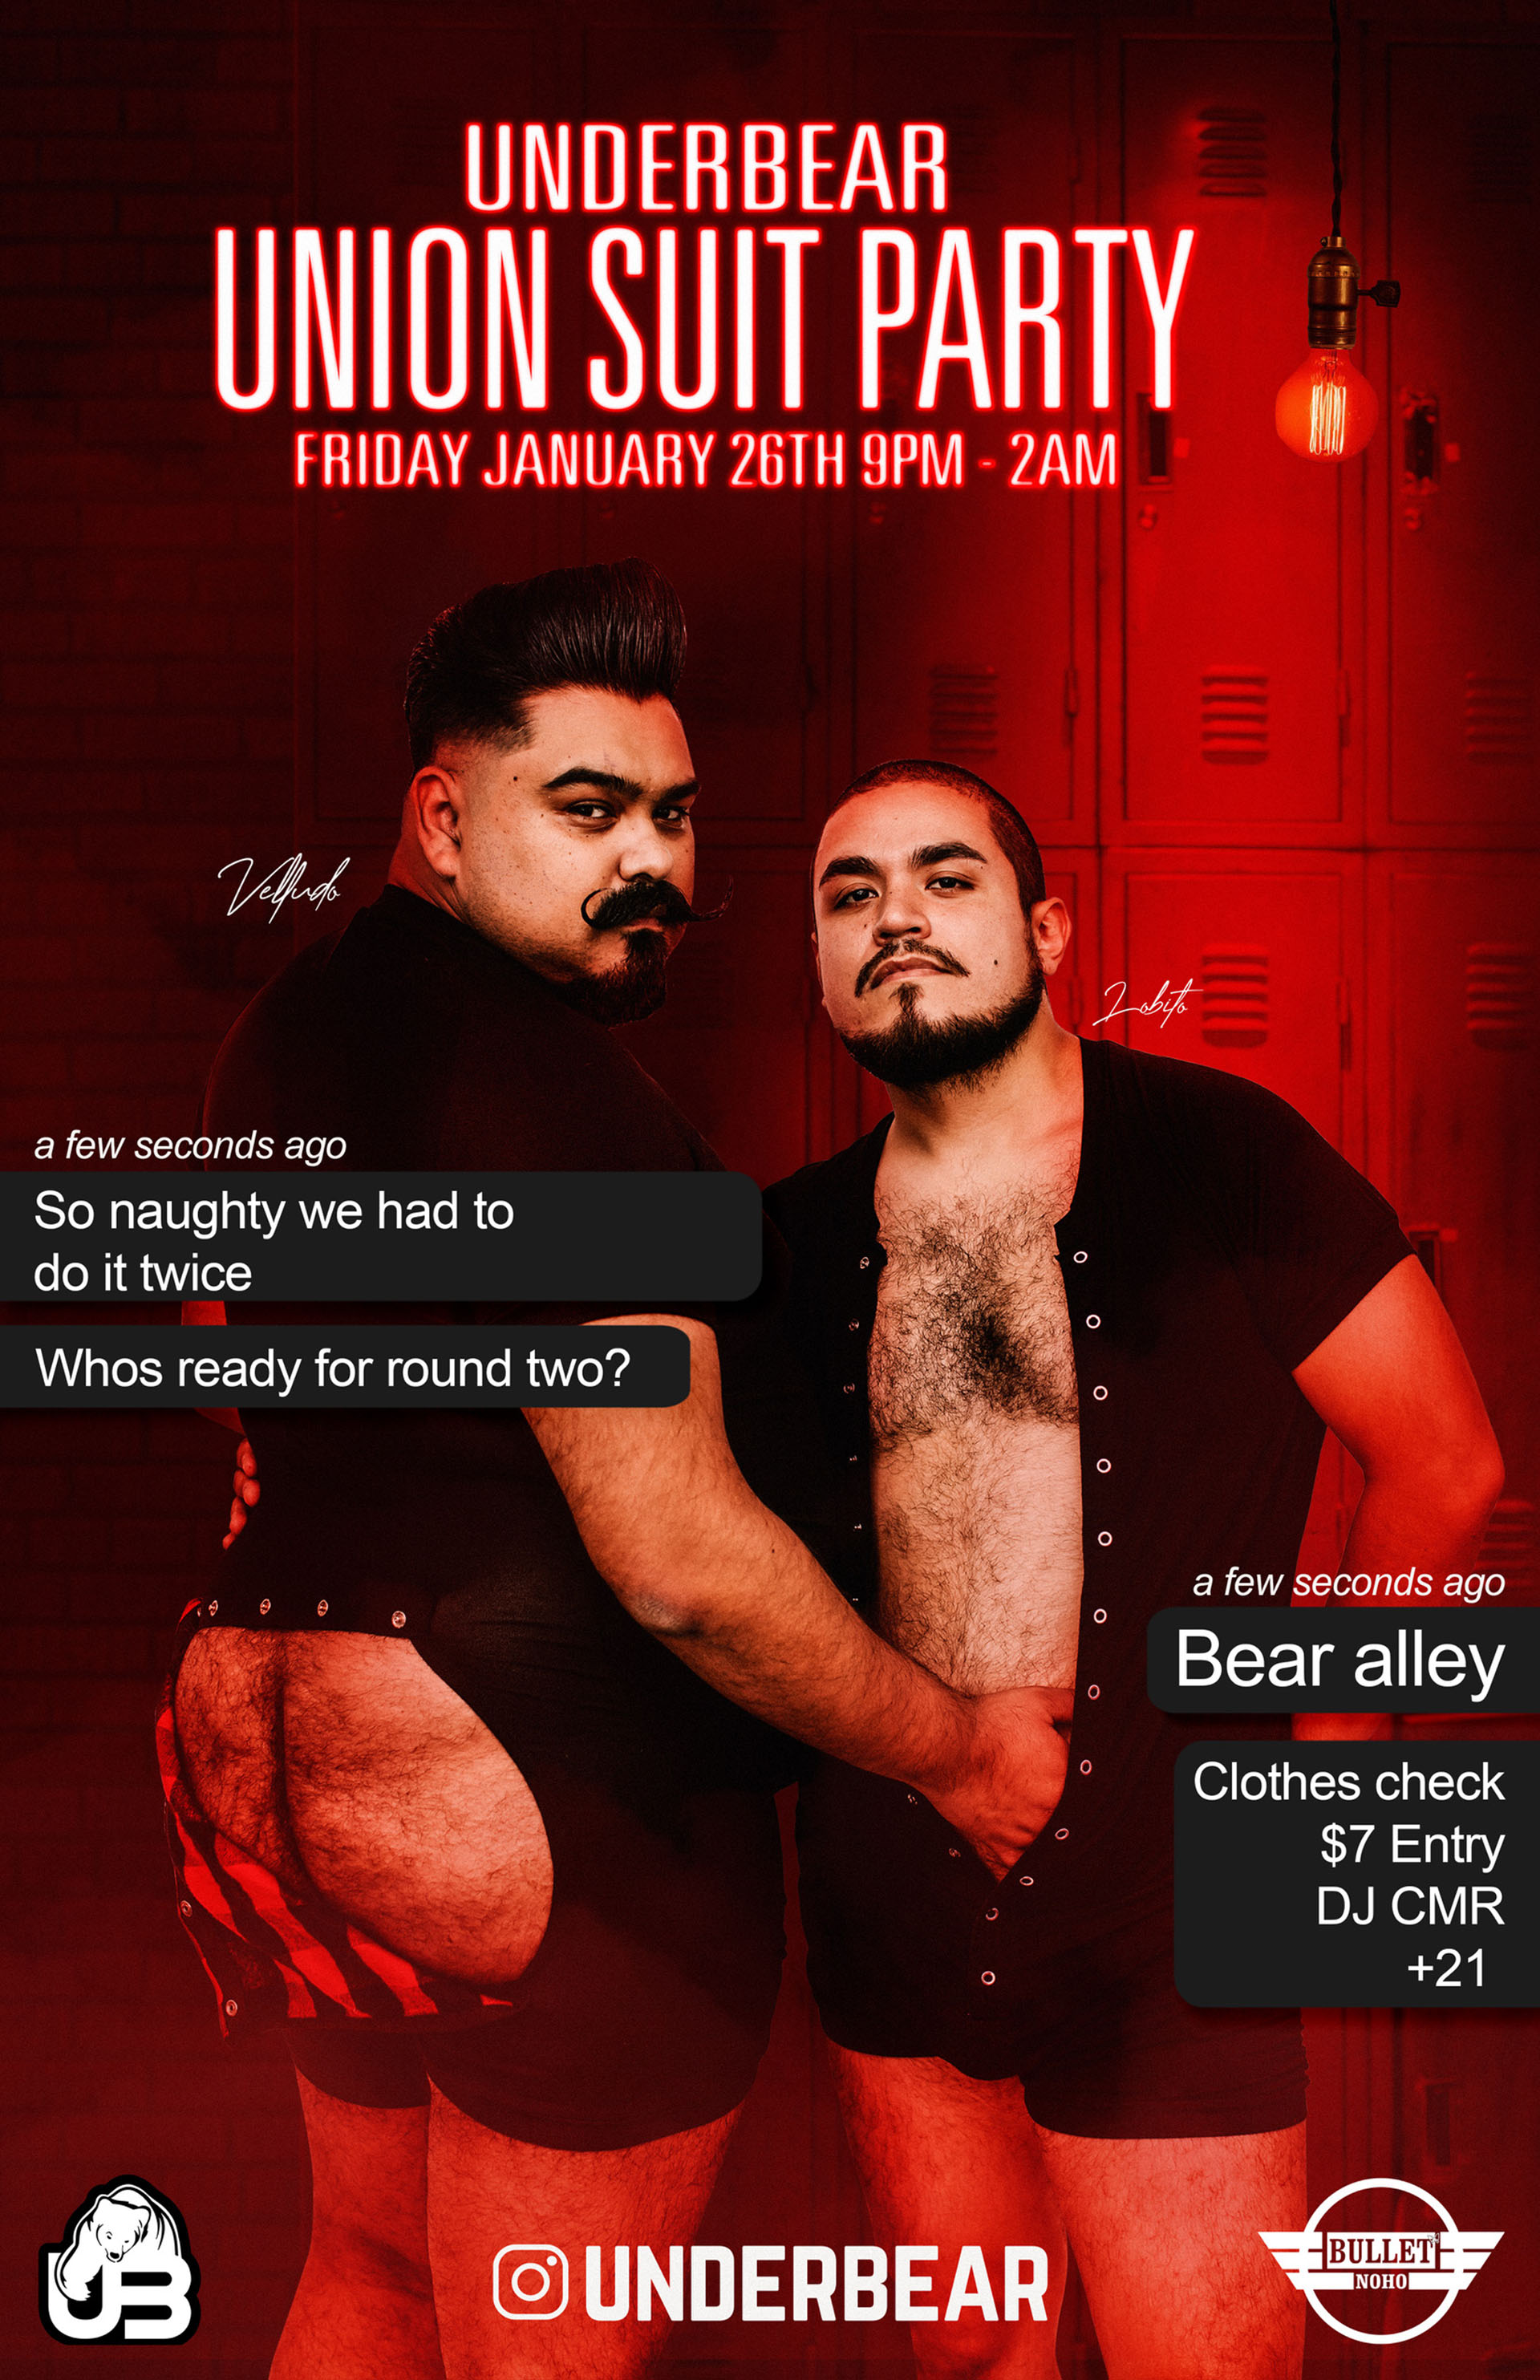 The Bullet Bar and UnderBearParty.com Present UNDERBEAR UNION SUIT PARTY with DJ CMR: Friday, 01/26/24 at 9:00 PM! BEAR ALLEY! $7 Cover.